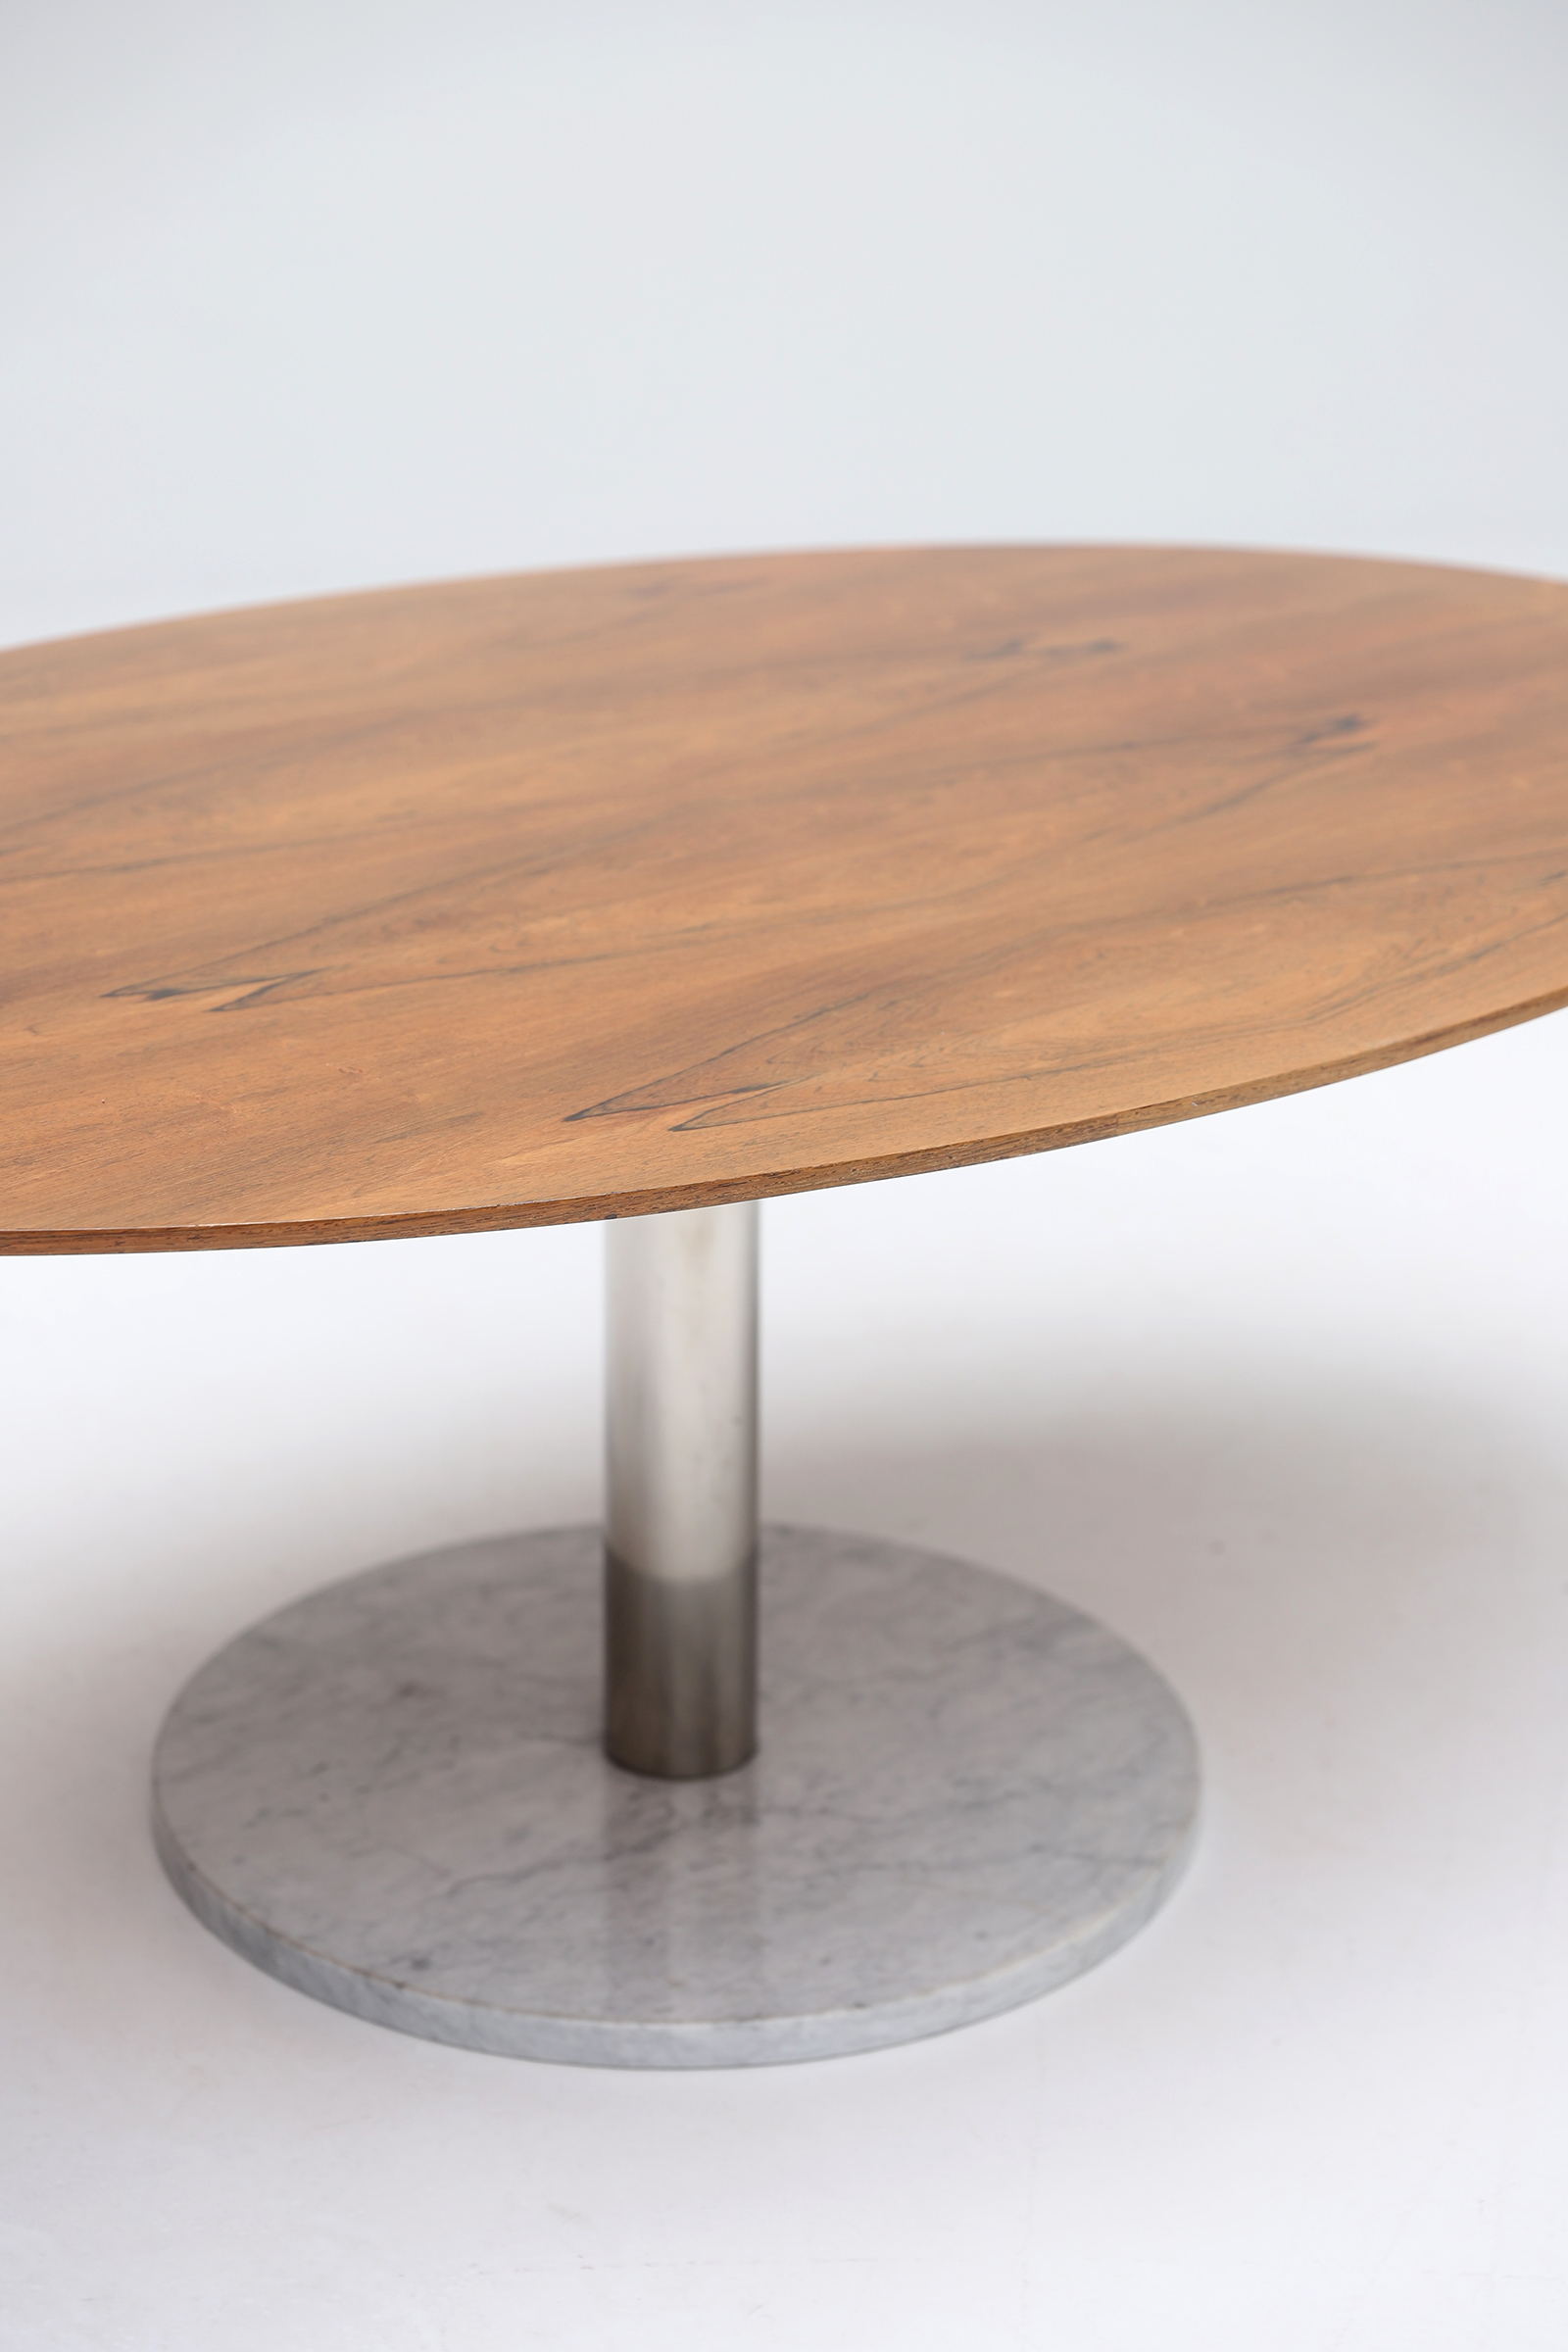 Alfred Hendrickx Oval Dining Table 1960s for Belformimage 9